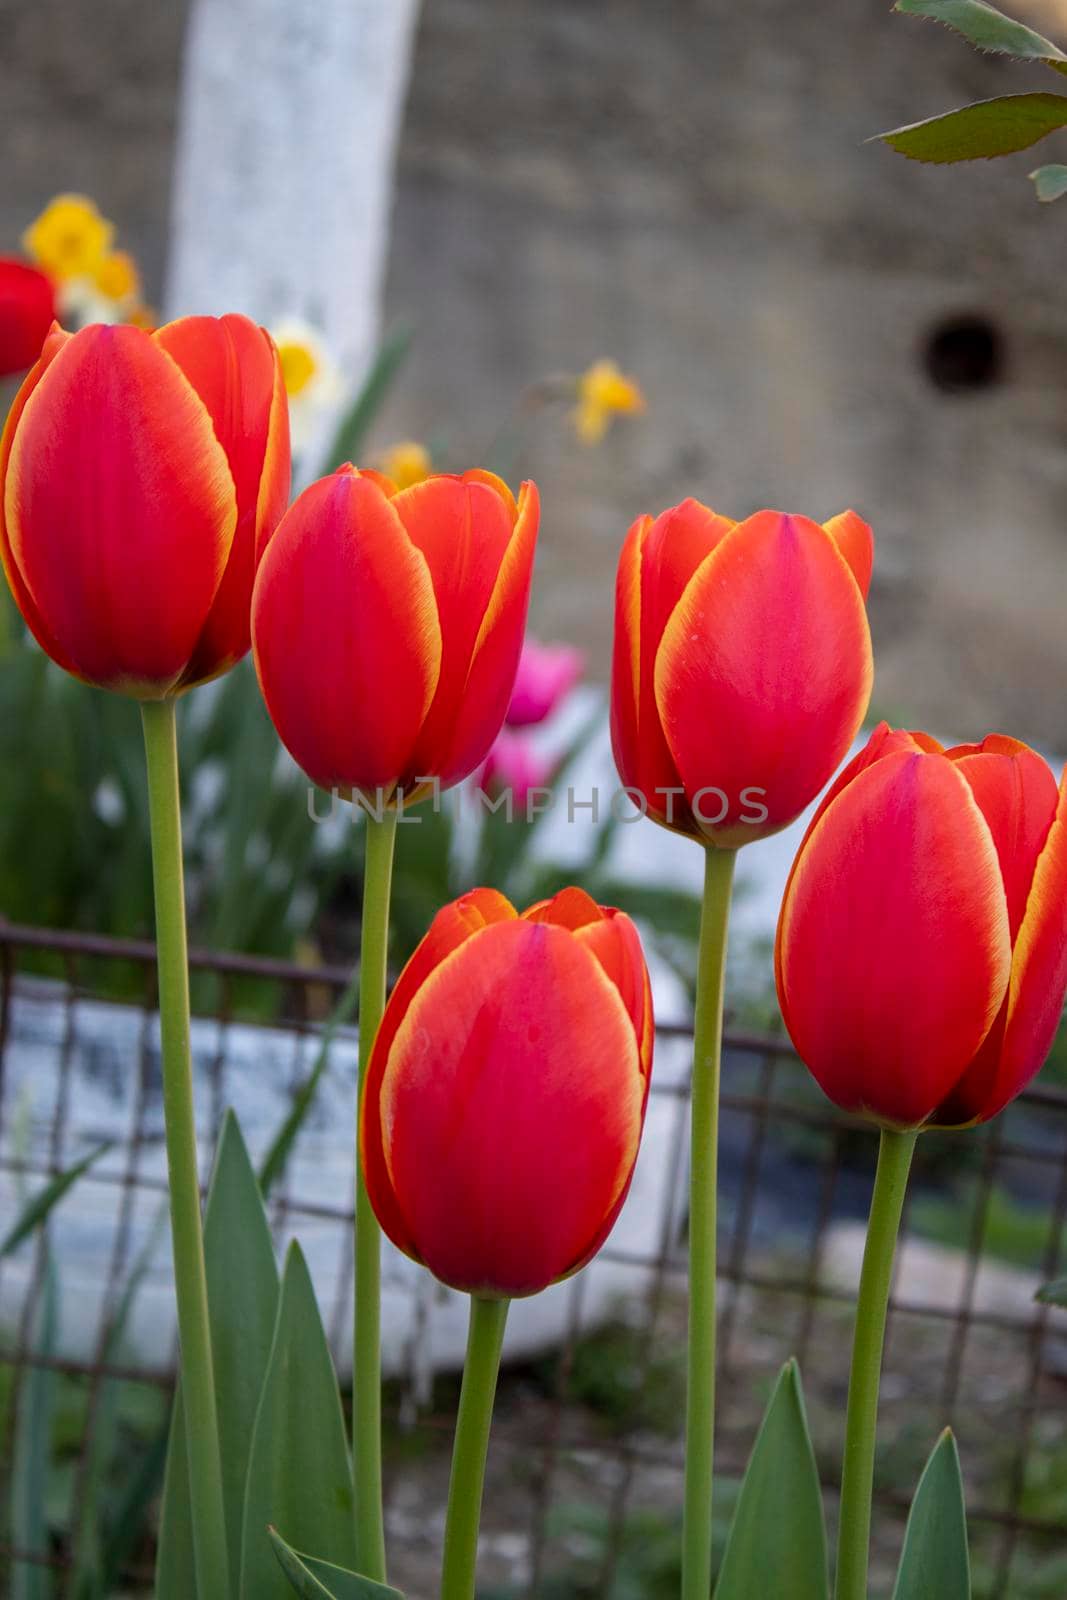 Beautiful spring red flowers background by bybyphotography